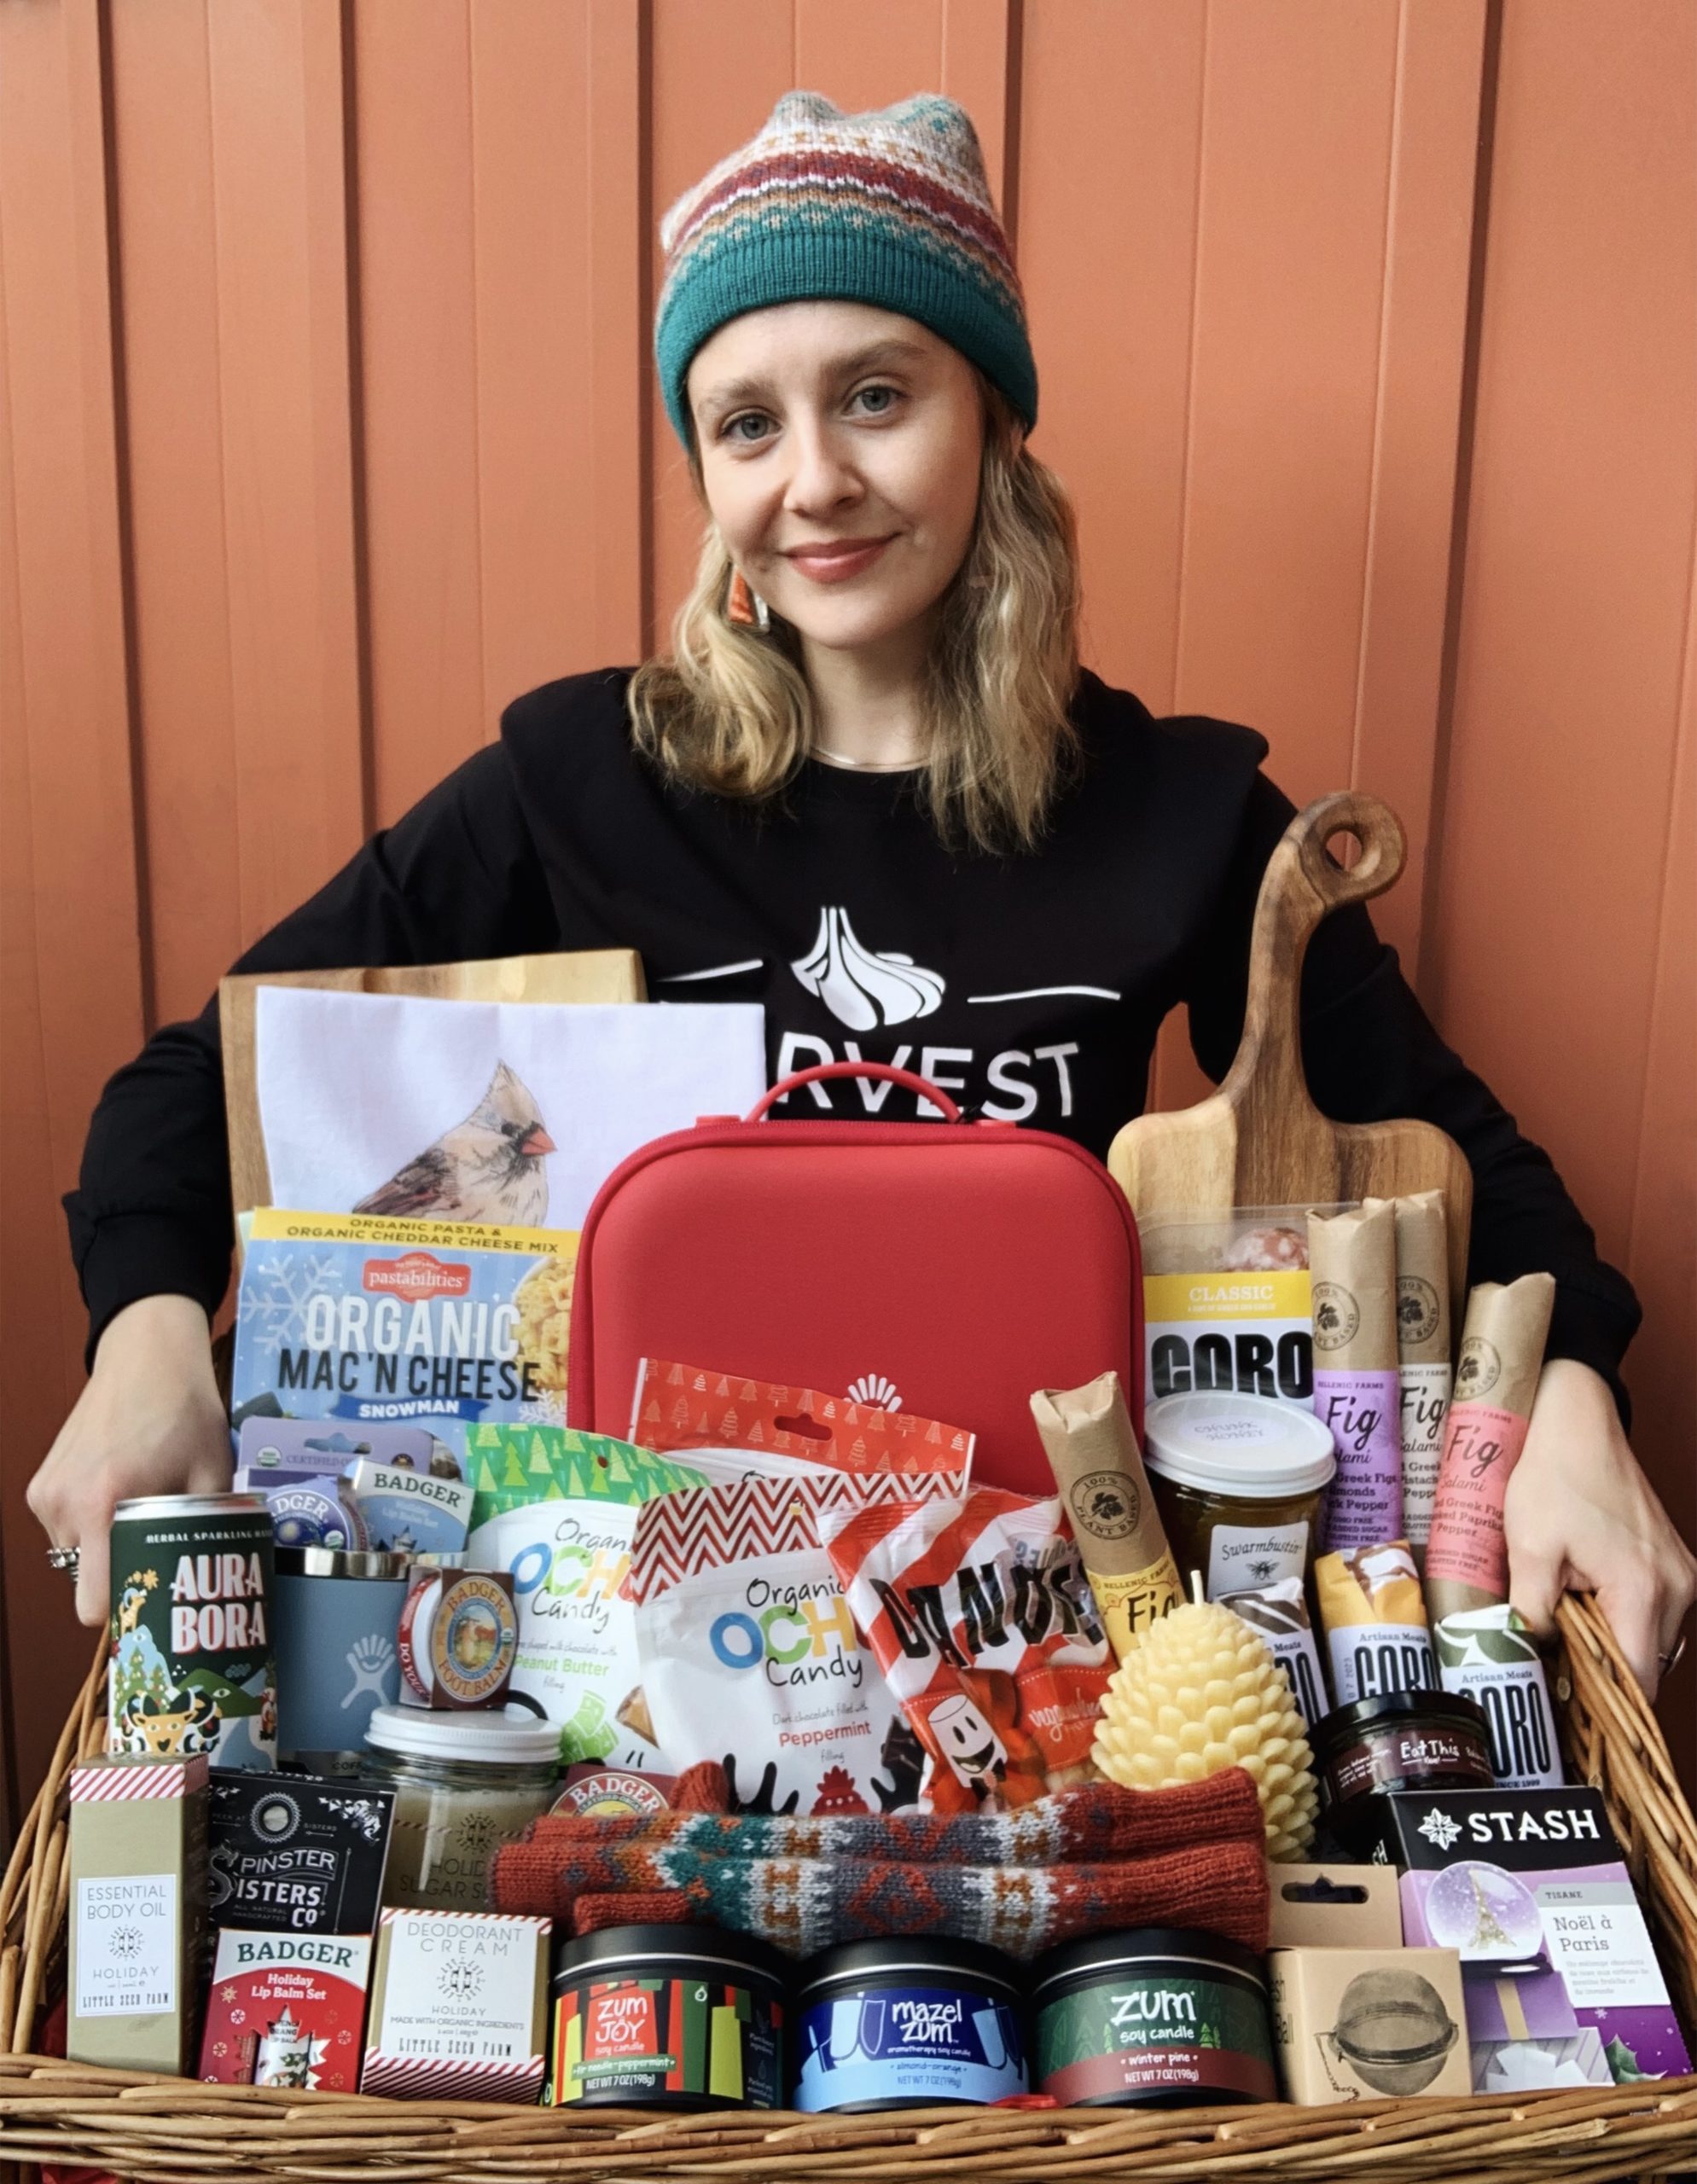 Woman with blonde hair and beanie holding a wicker basket full of holiday products like candles, candy, a red lunchbox, seasonal teas, and charcuterie products